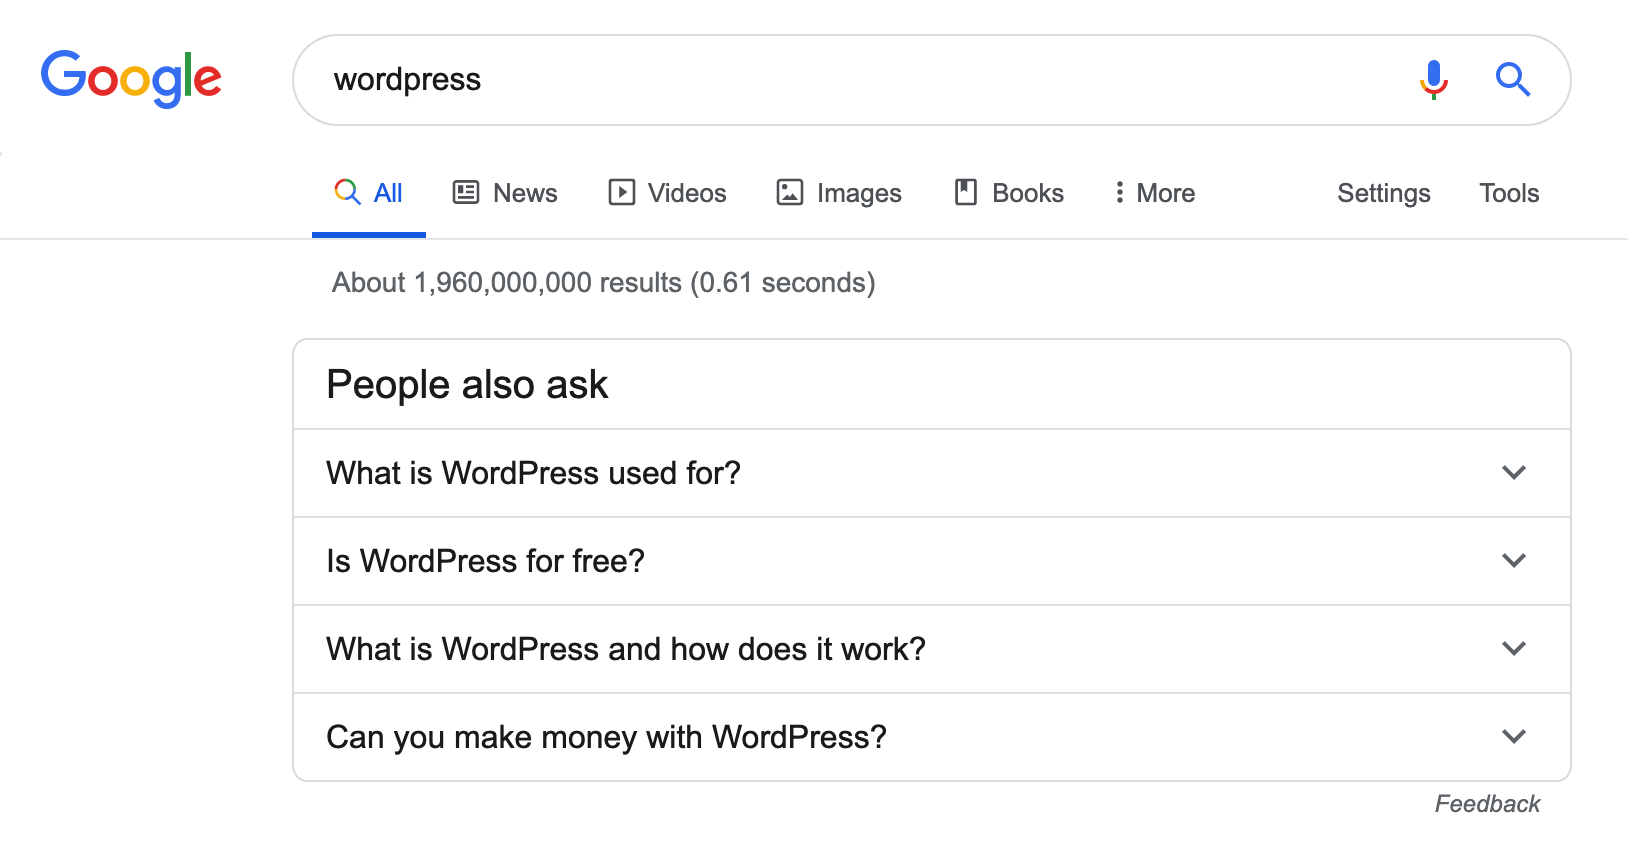 google-wordpress-related-questions